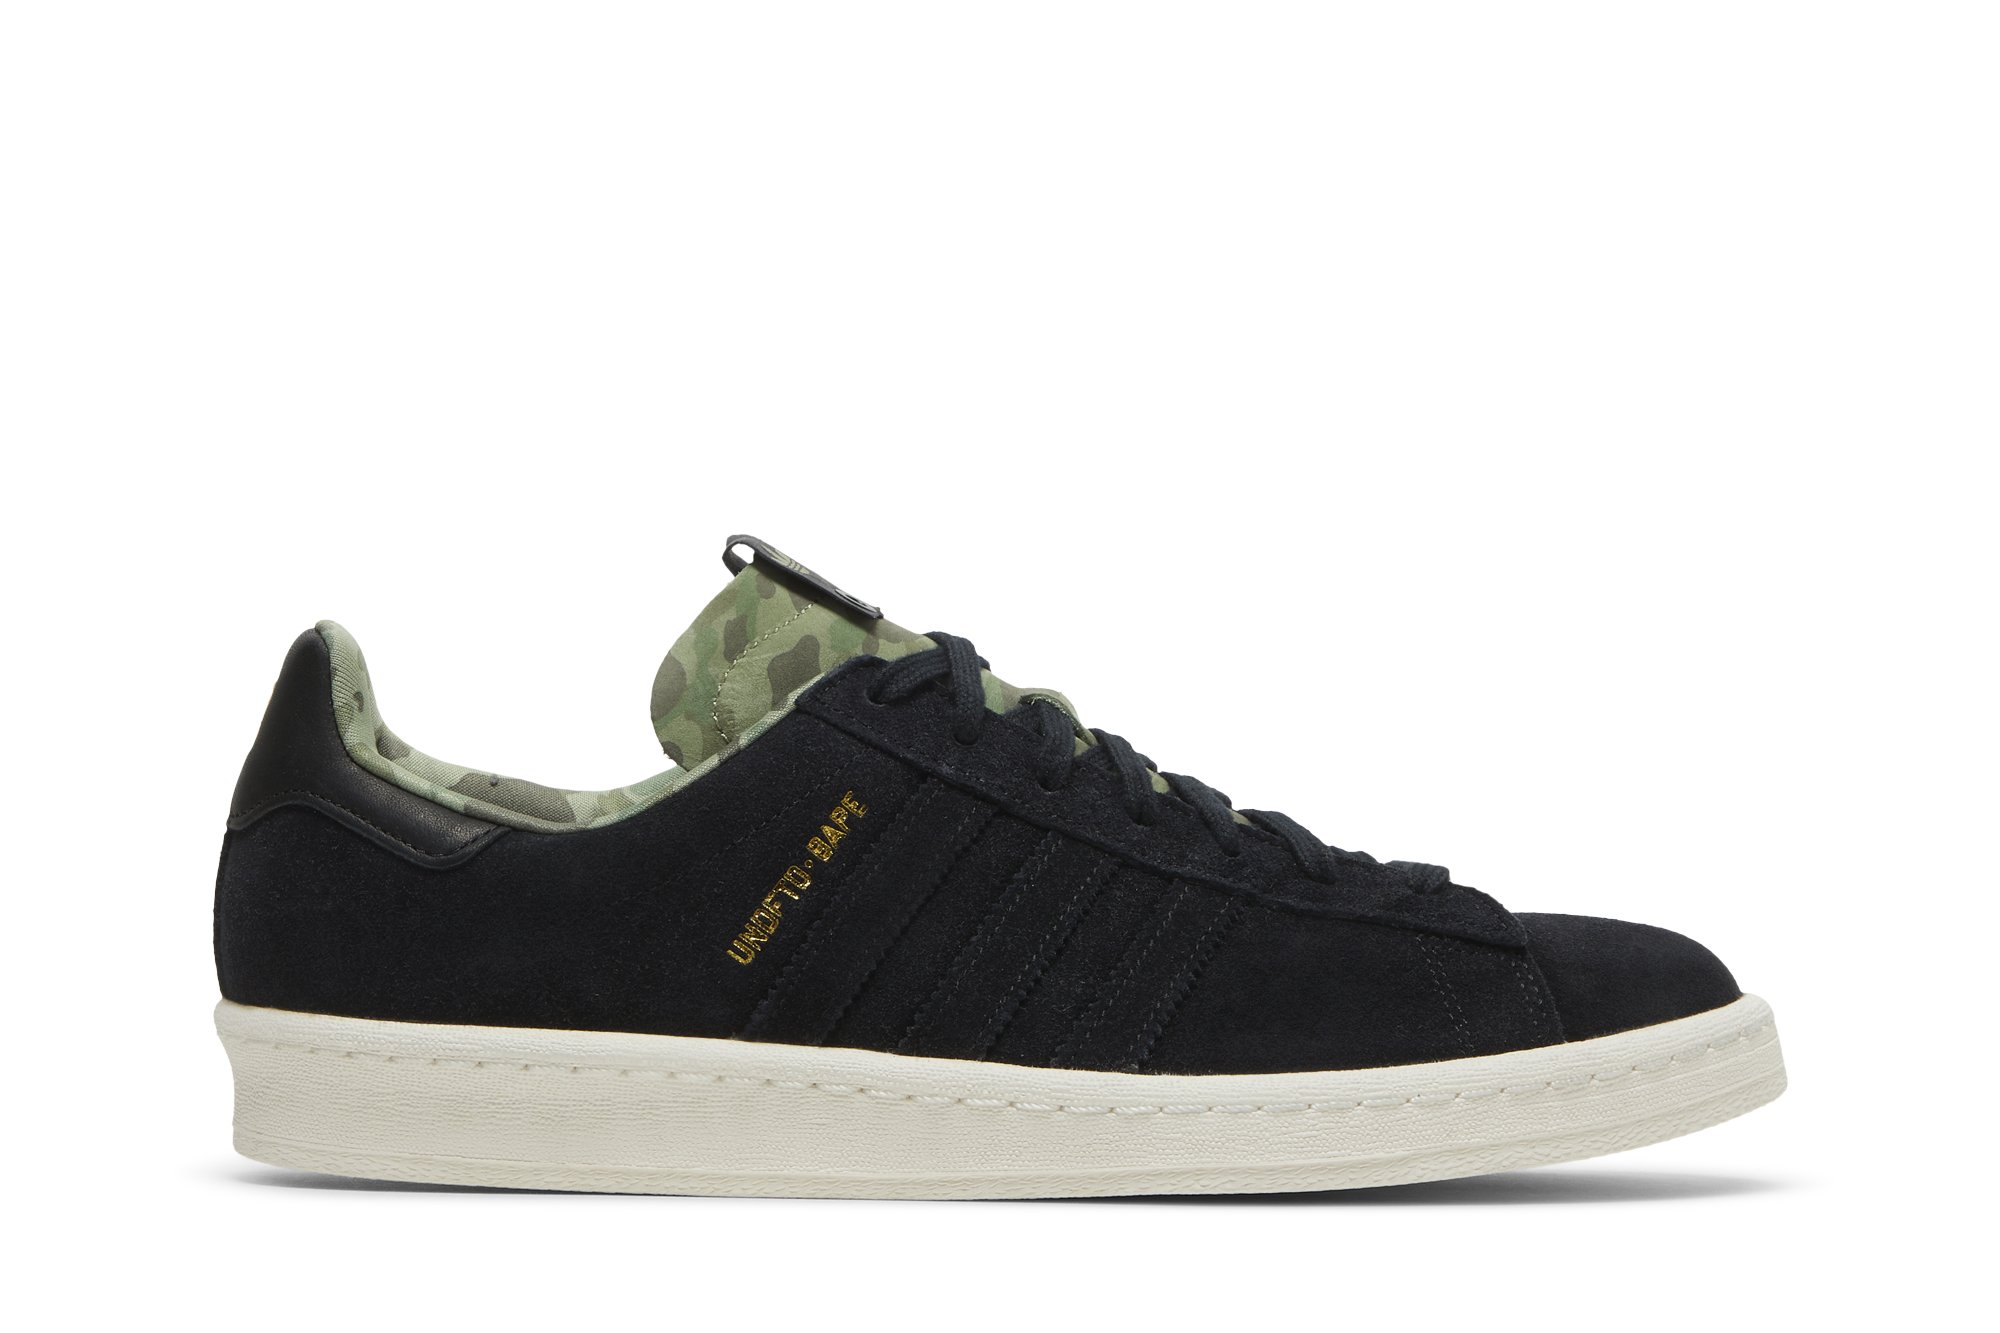 Buy Undefeated x A Bathing Ape x Campus 80s 'Black' - Q34750 | GOAT